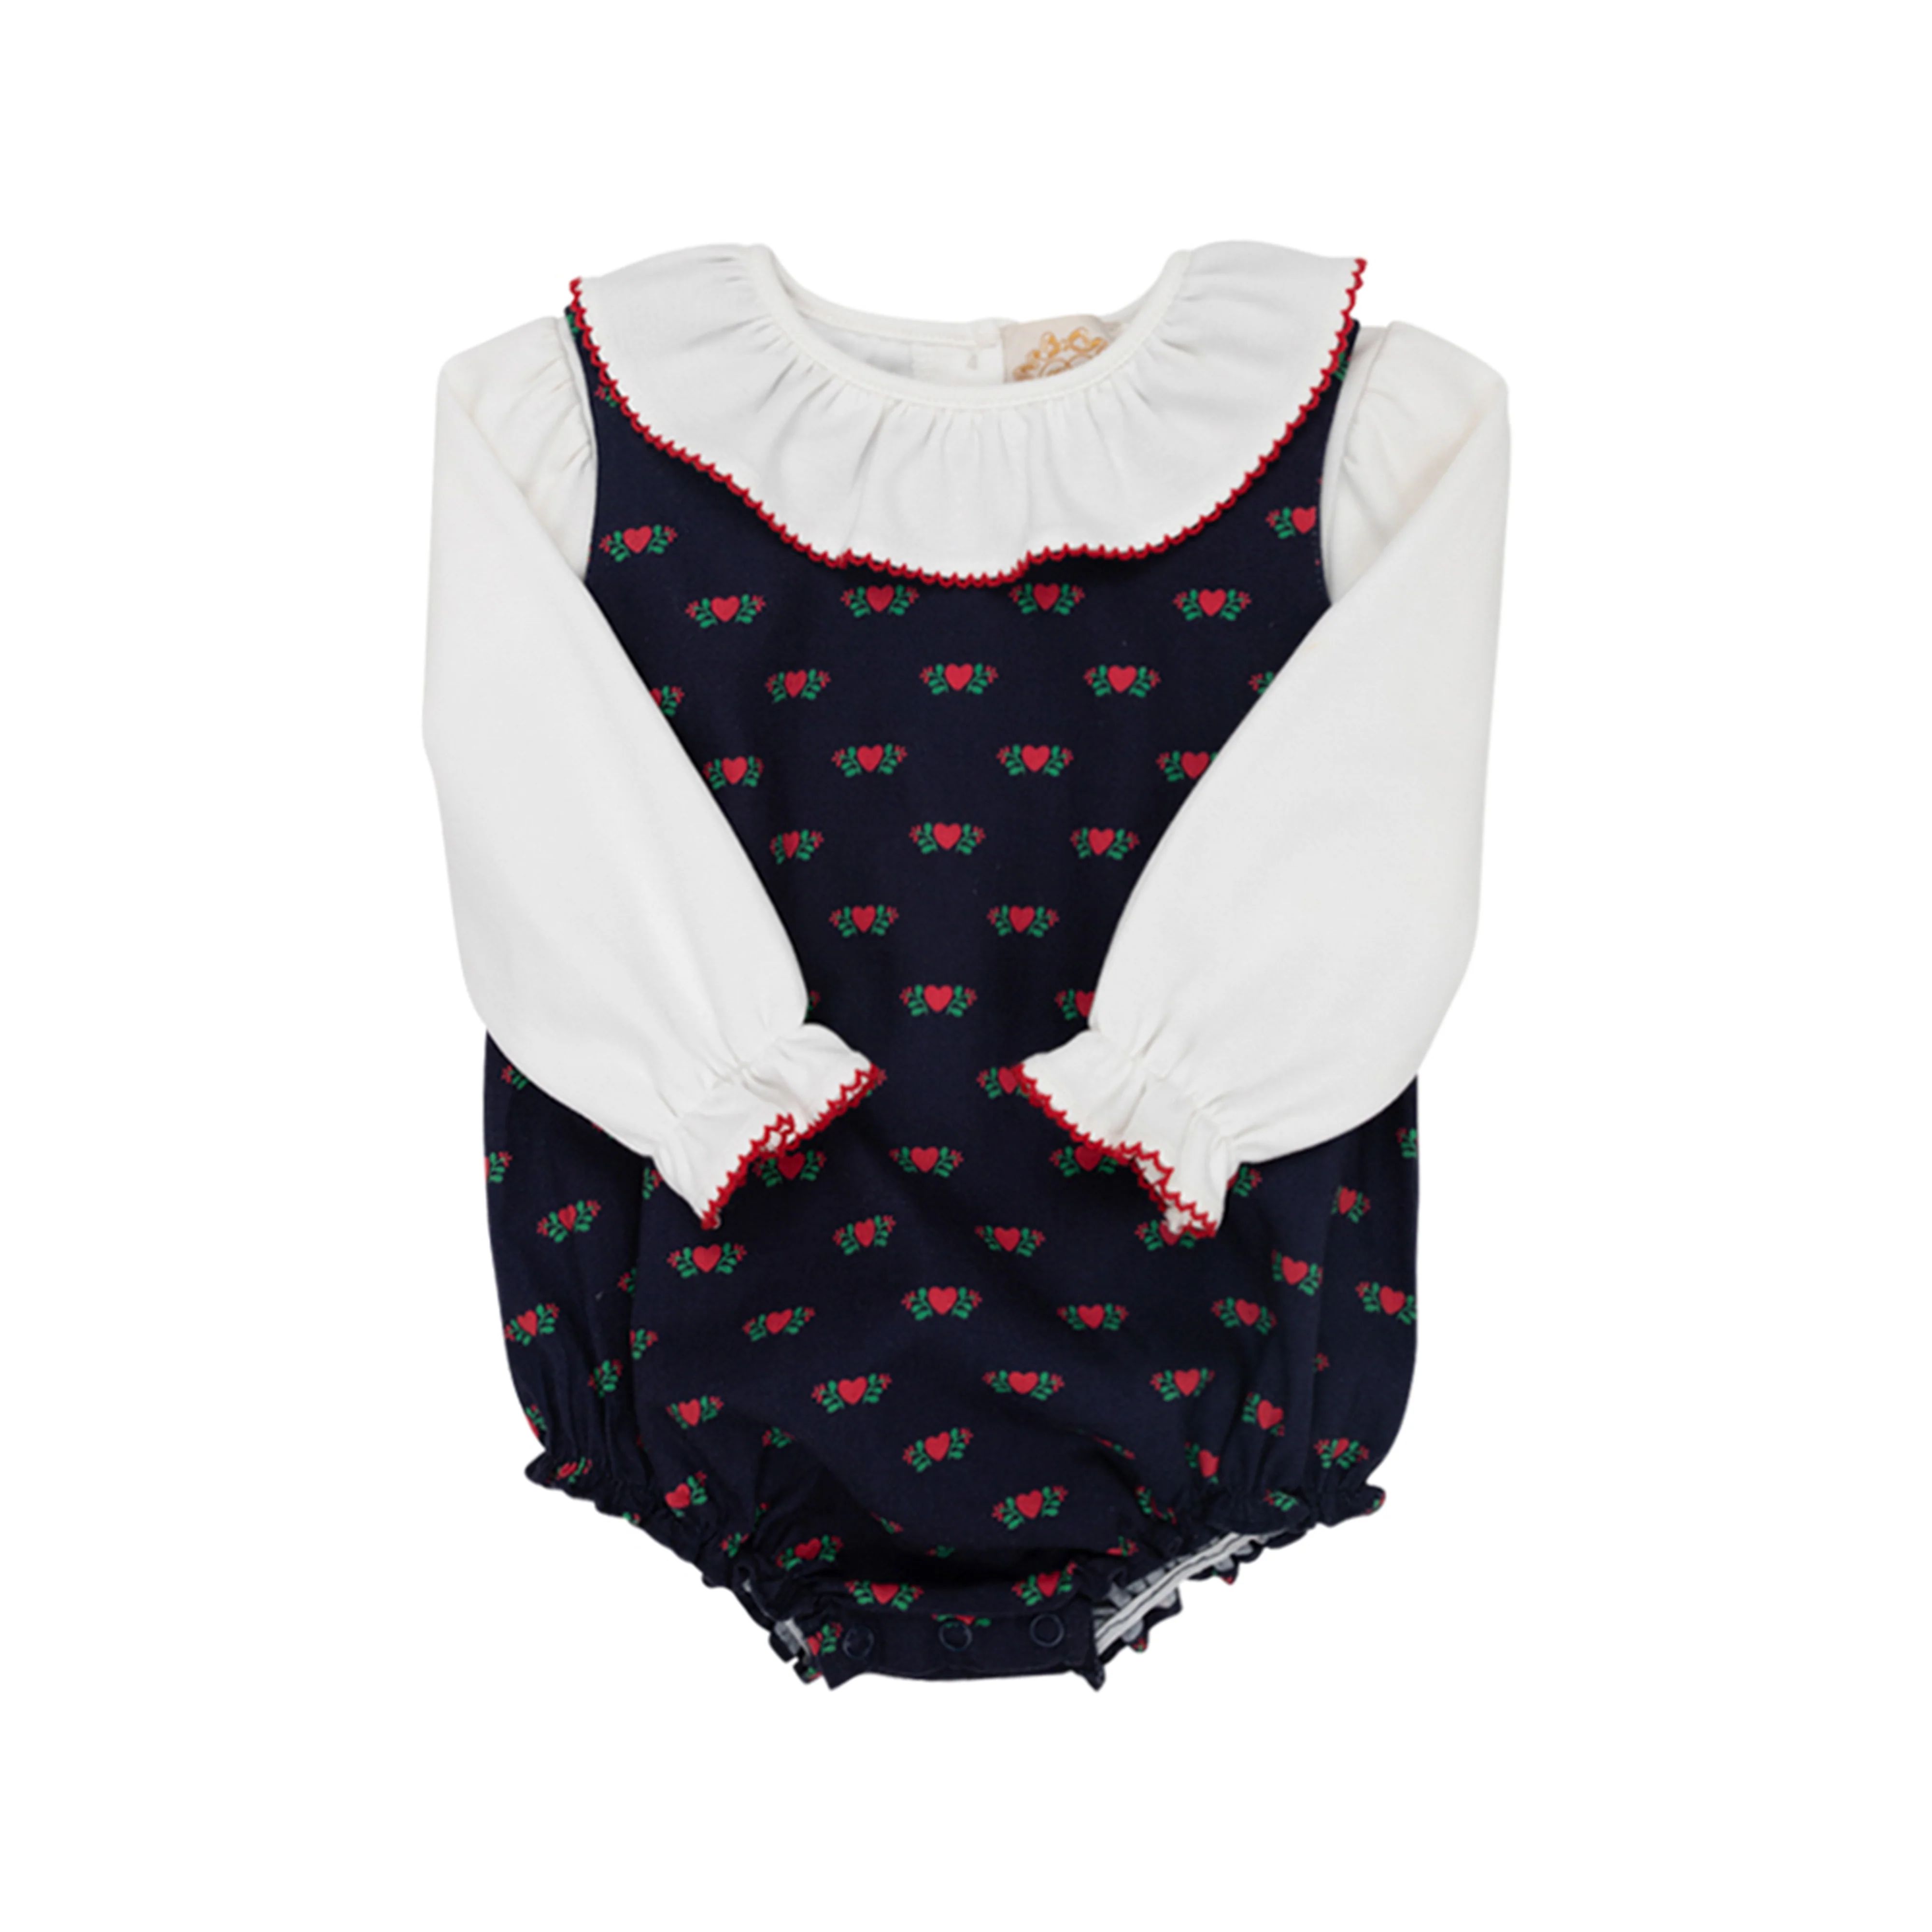 Long Sleeve Brooksy Bubble Set - A Kind Heart with Worth Avenue White & Richmond Red Picot | The Beaufort Bonnet Company